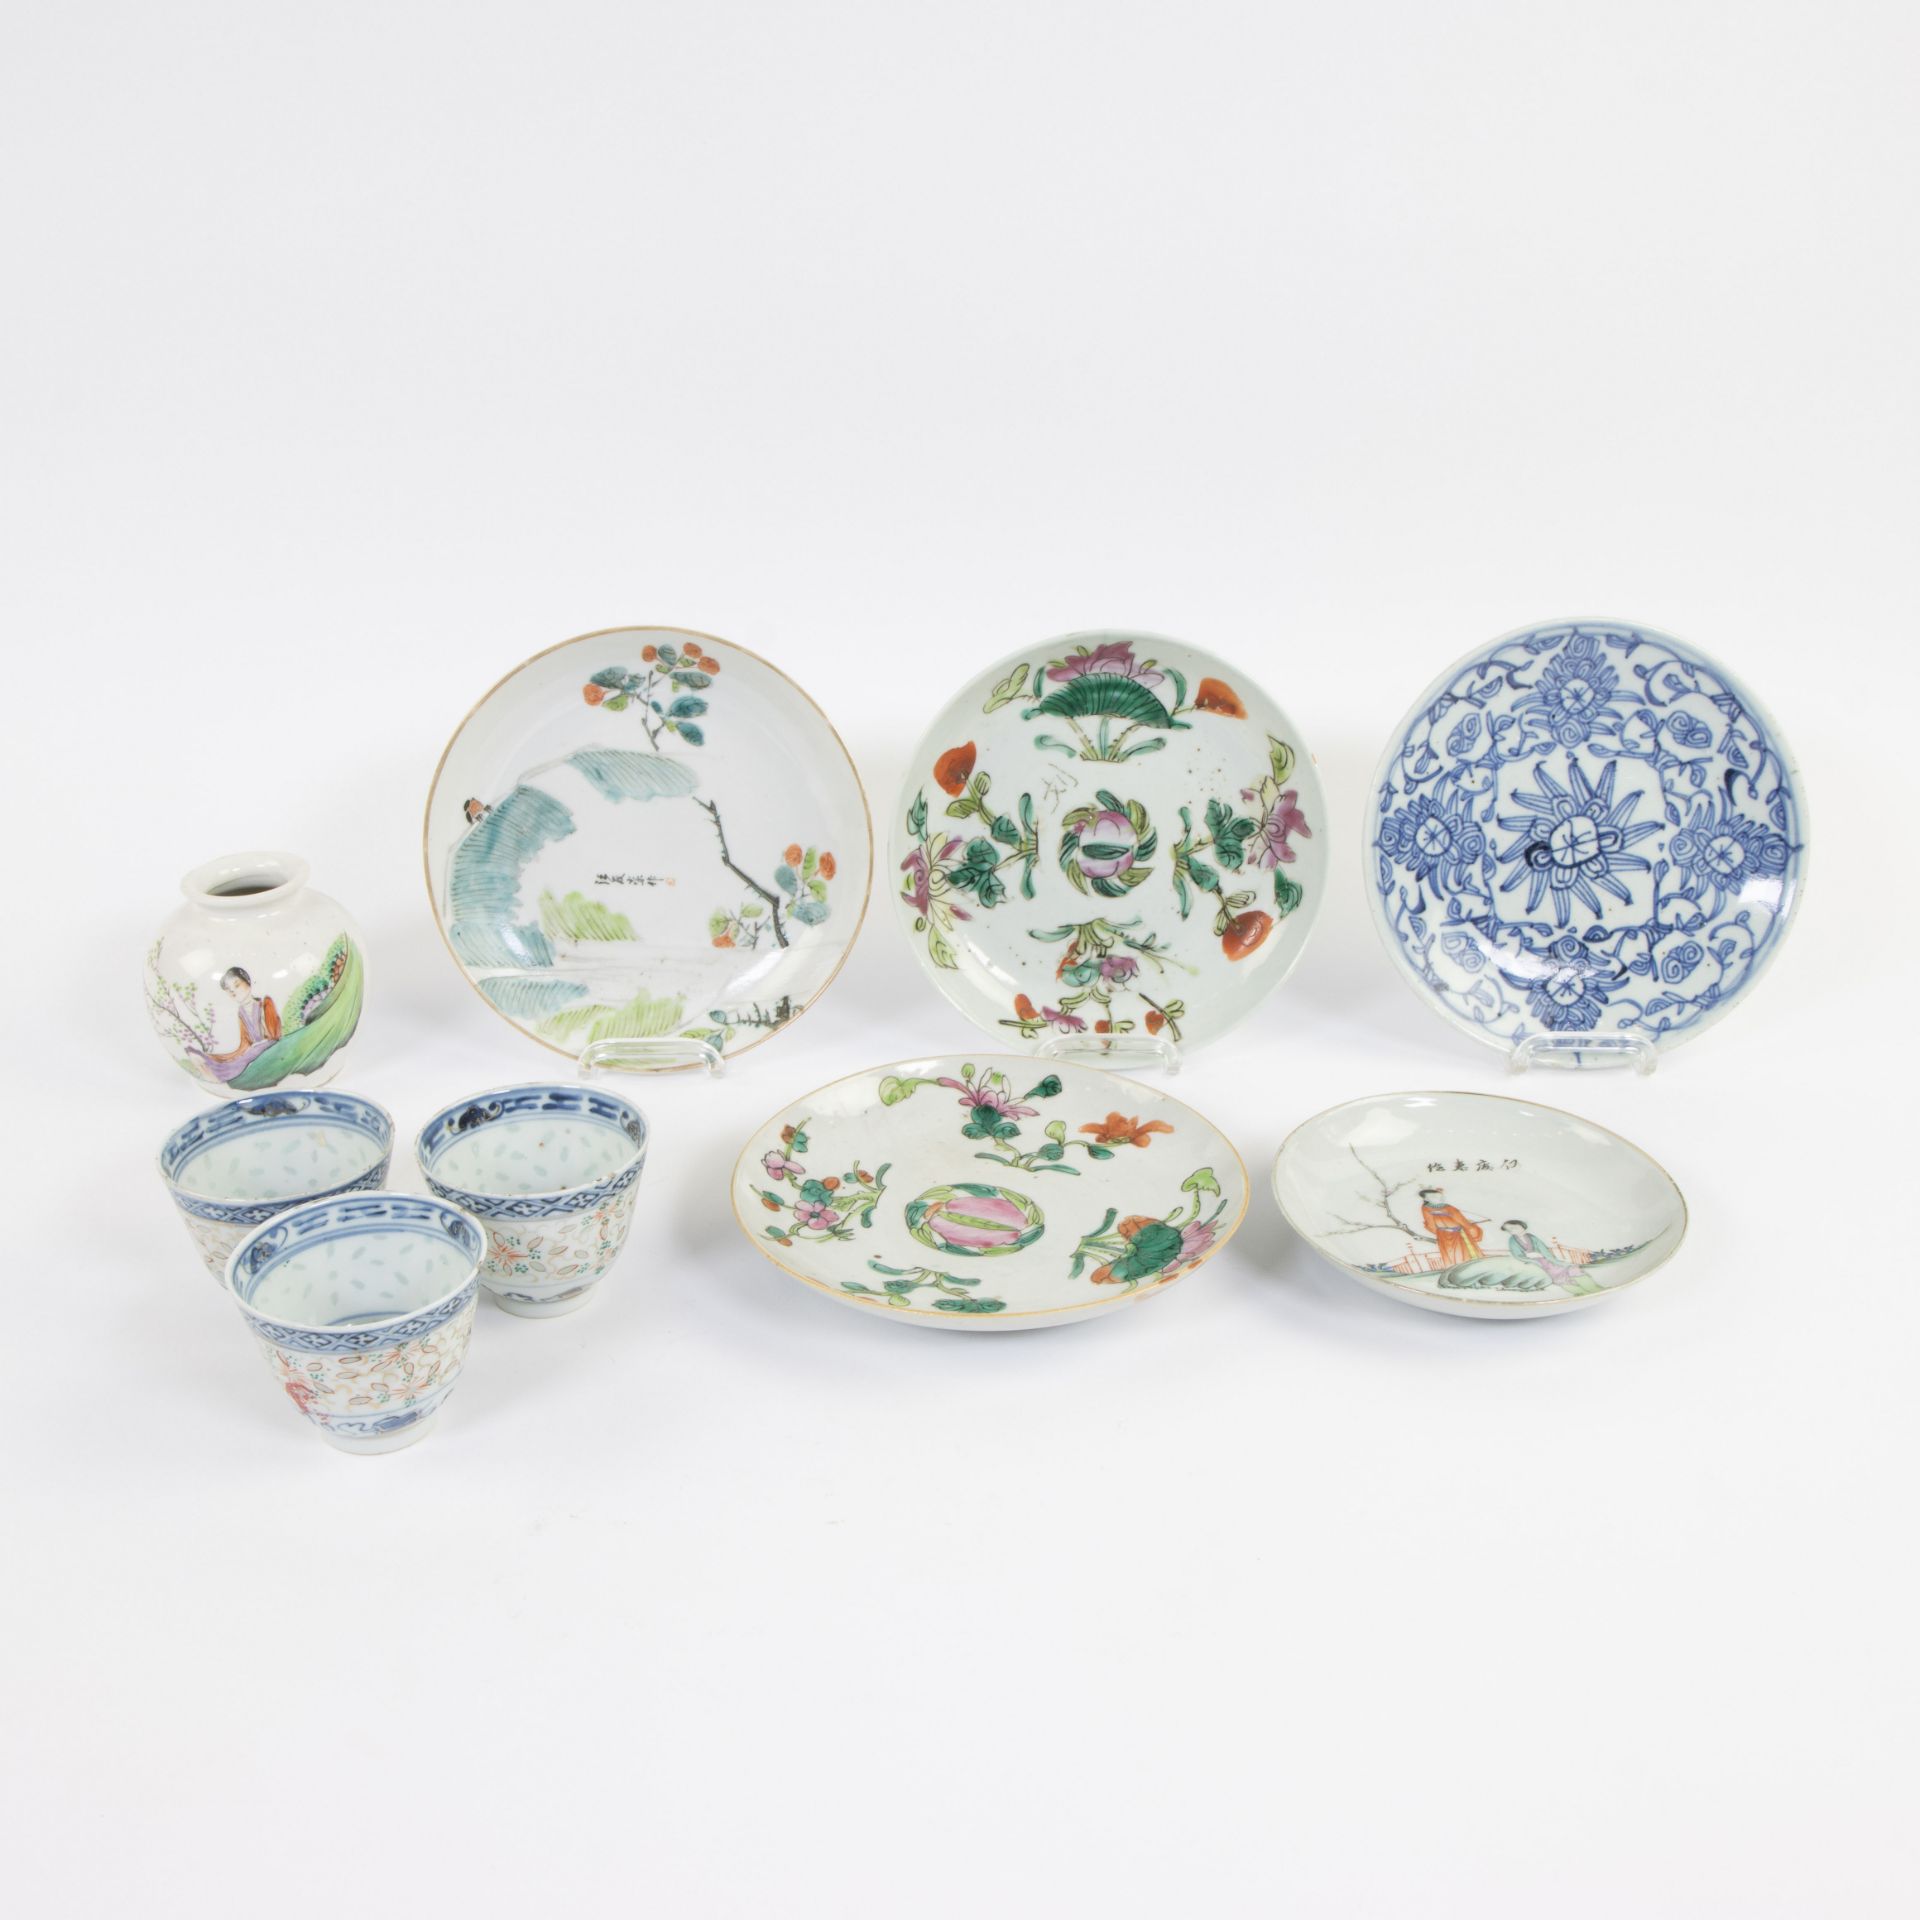 Collection of Chinese porcelain: plates, bowls and vase